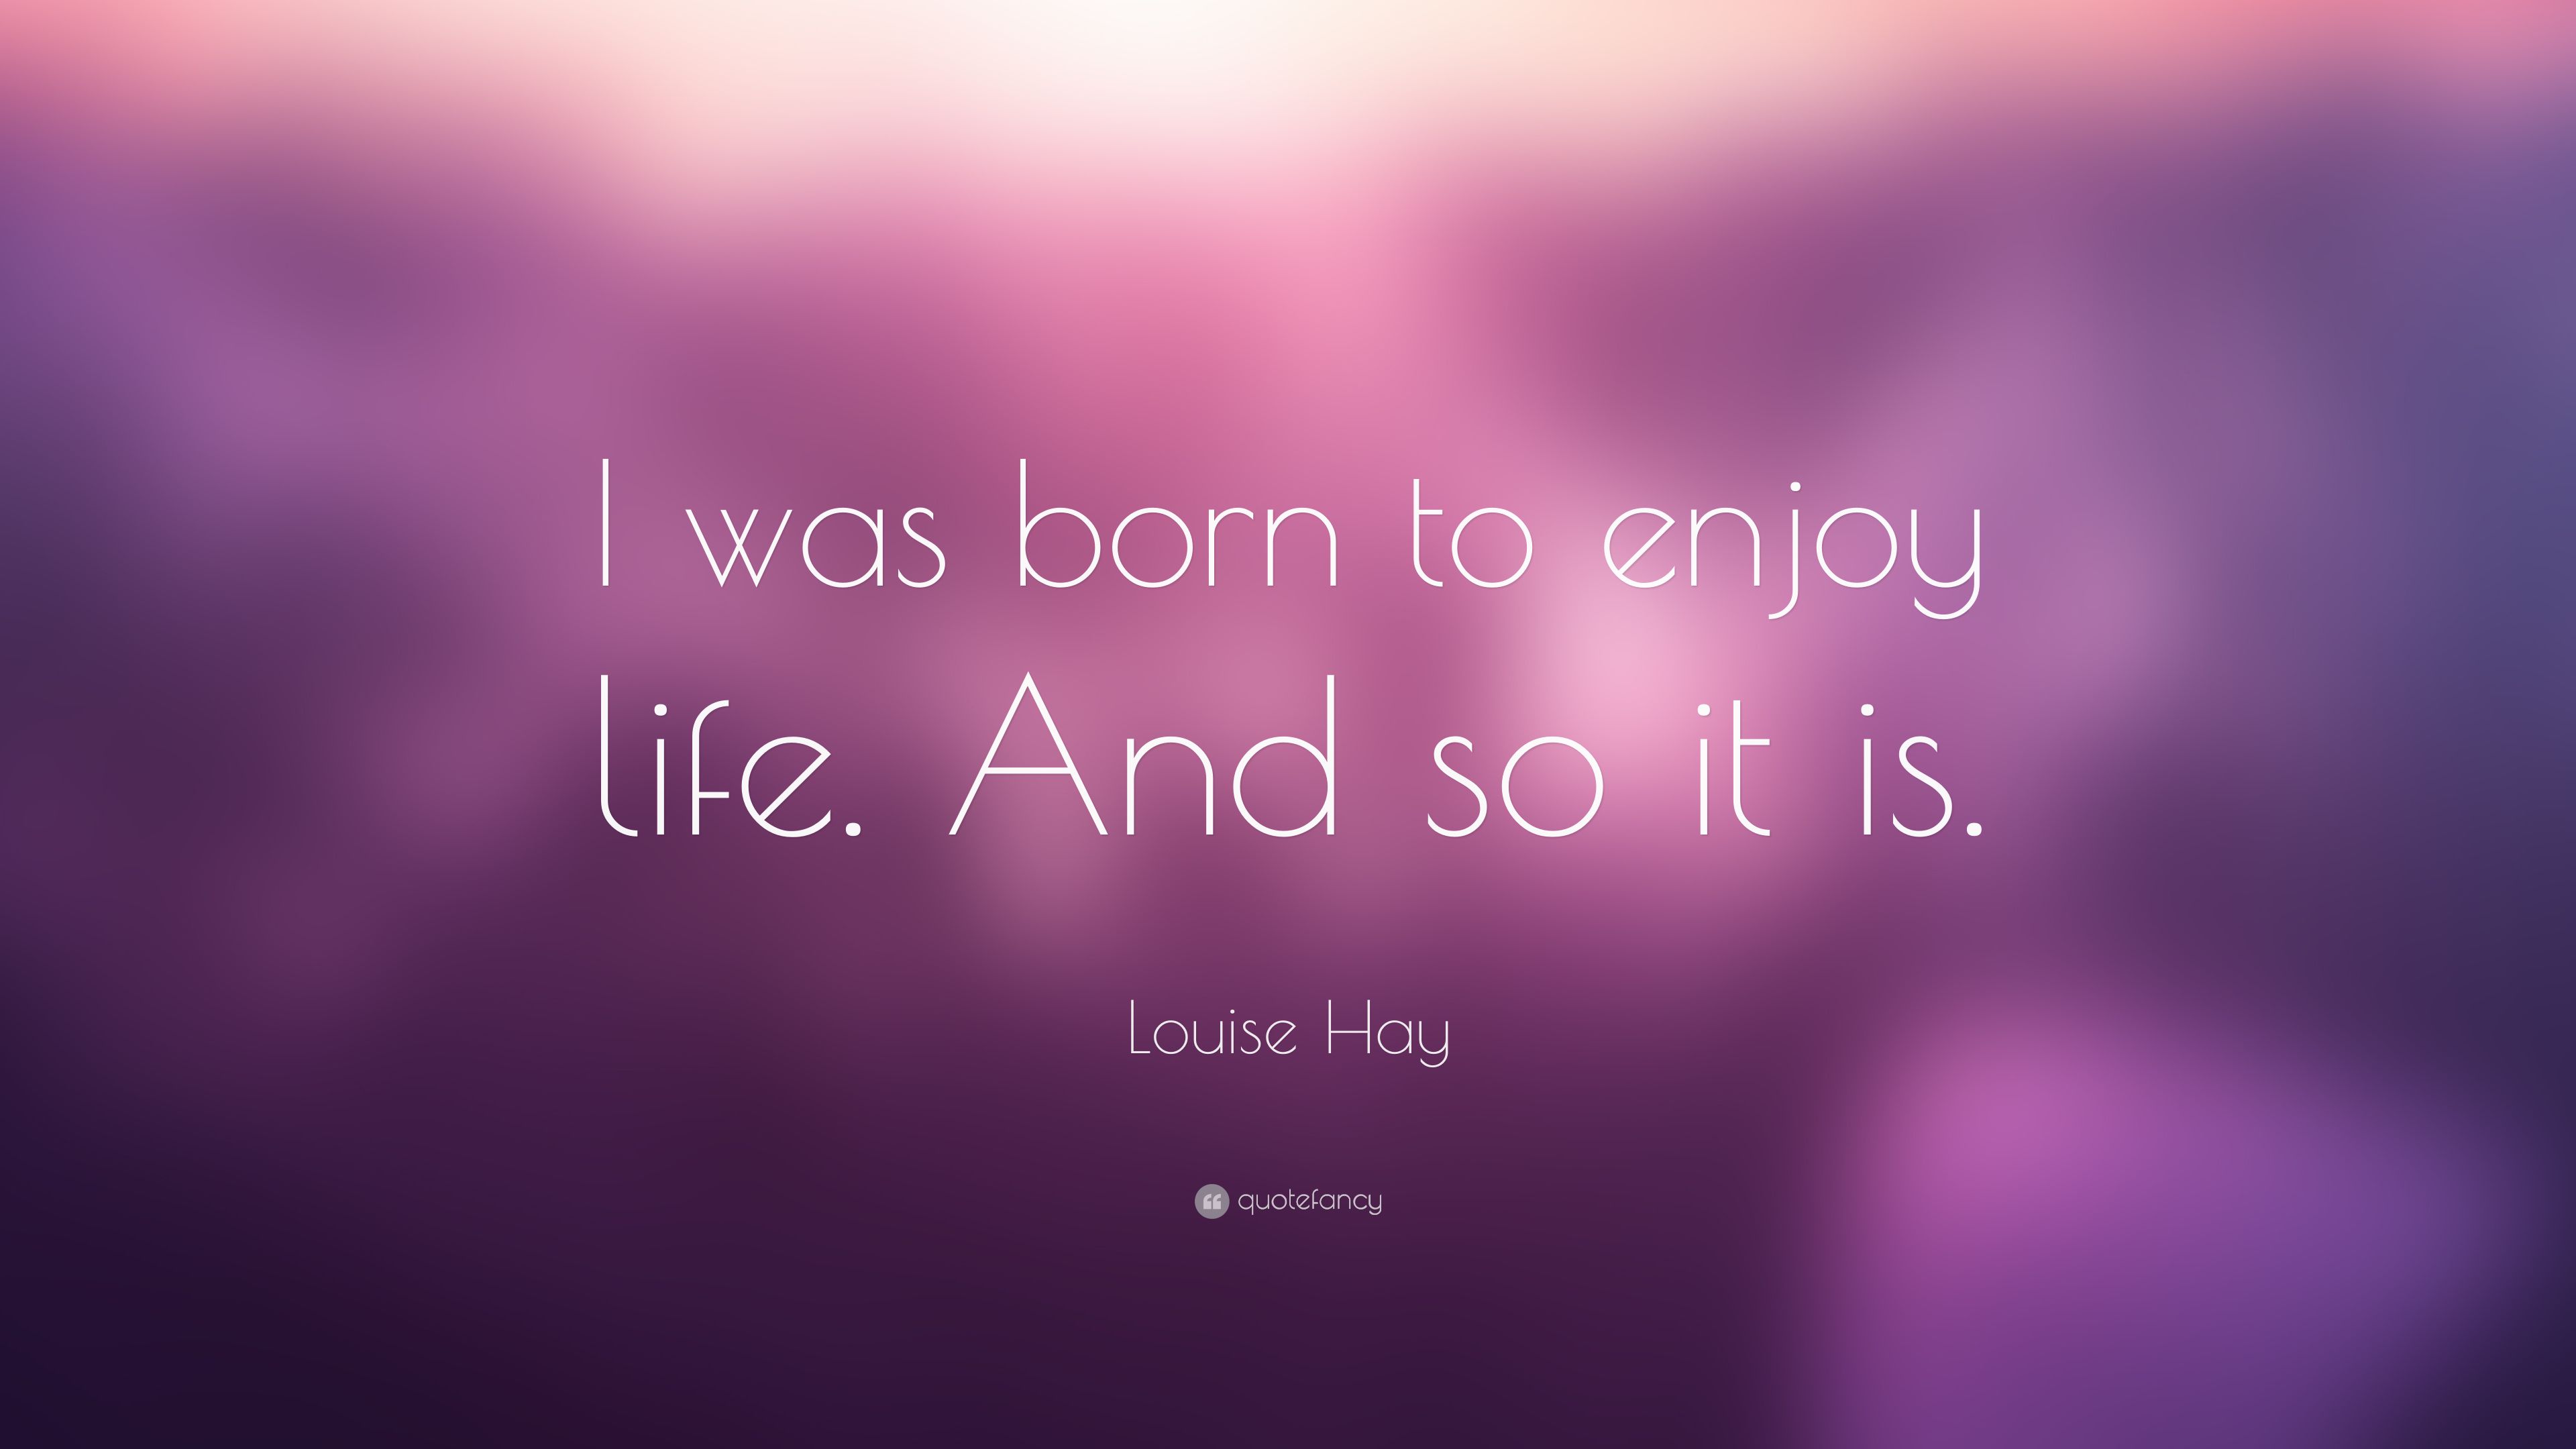 Louise Hay Quote: “I was born to enjoy life. And so it is.” (12 wallpaper)